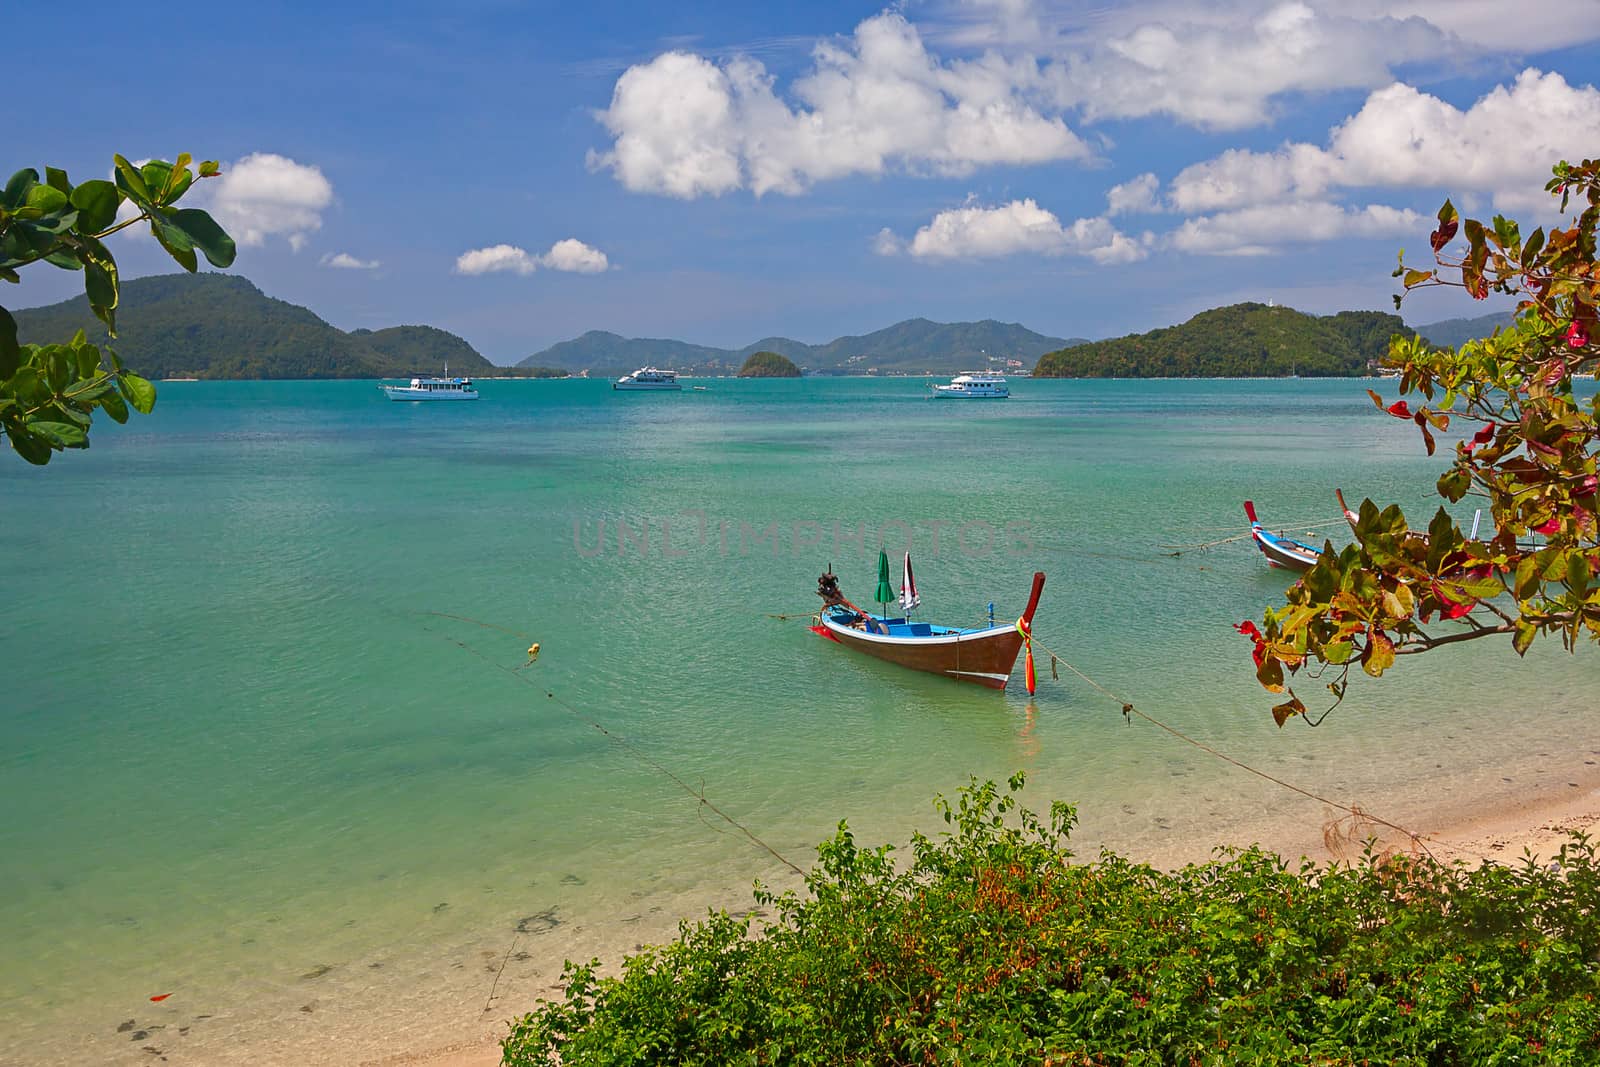 Boat in  sea is moving over  waves, Thailand. Beautiful tropical landscape.